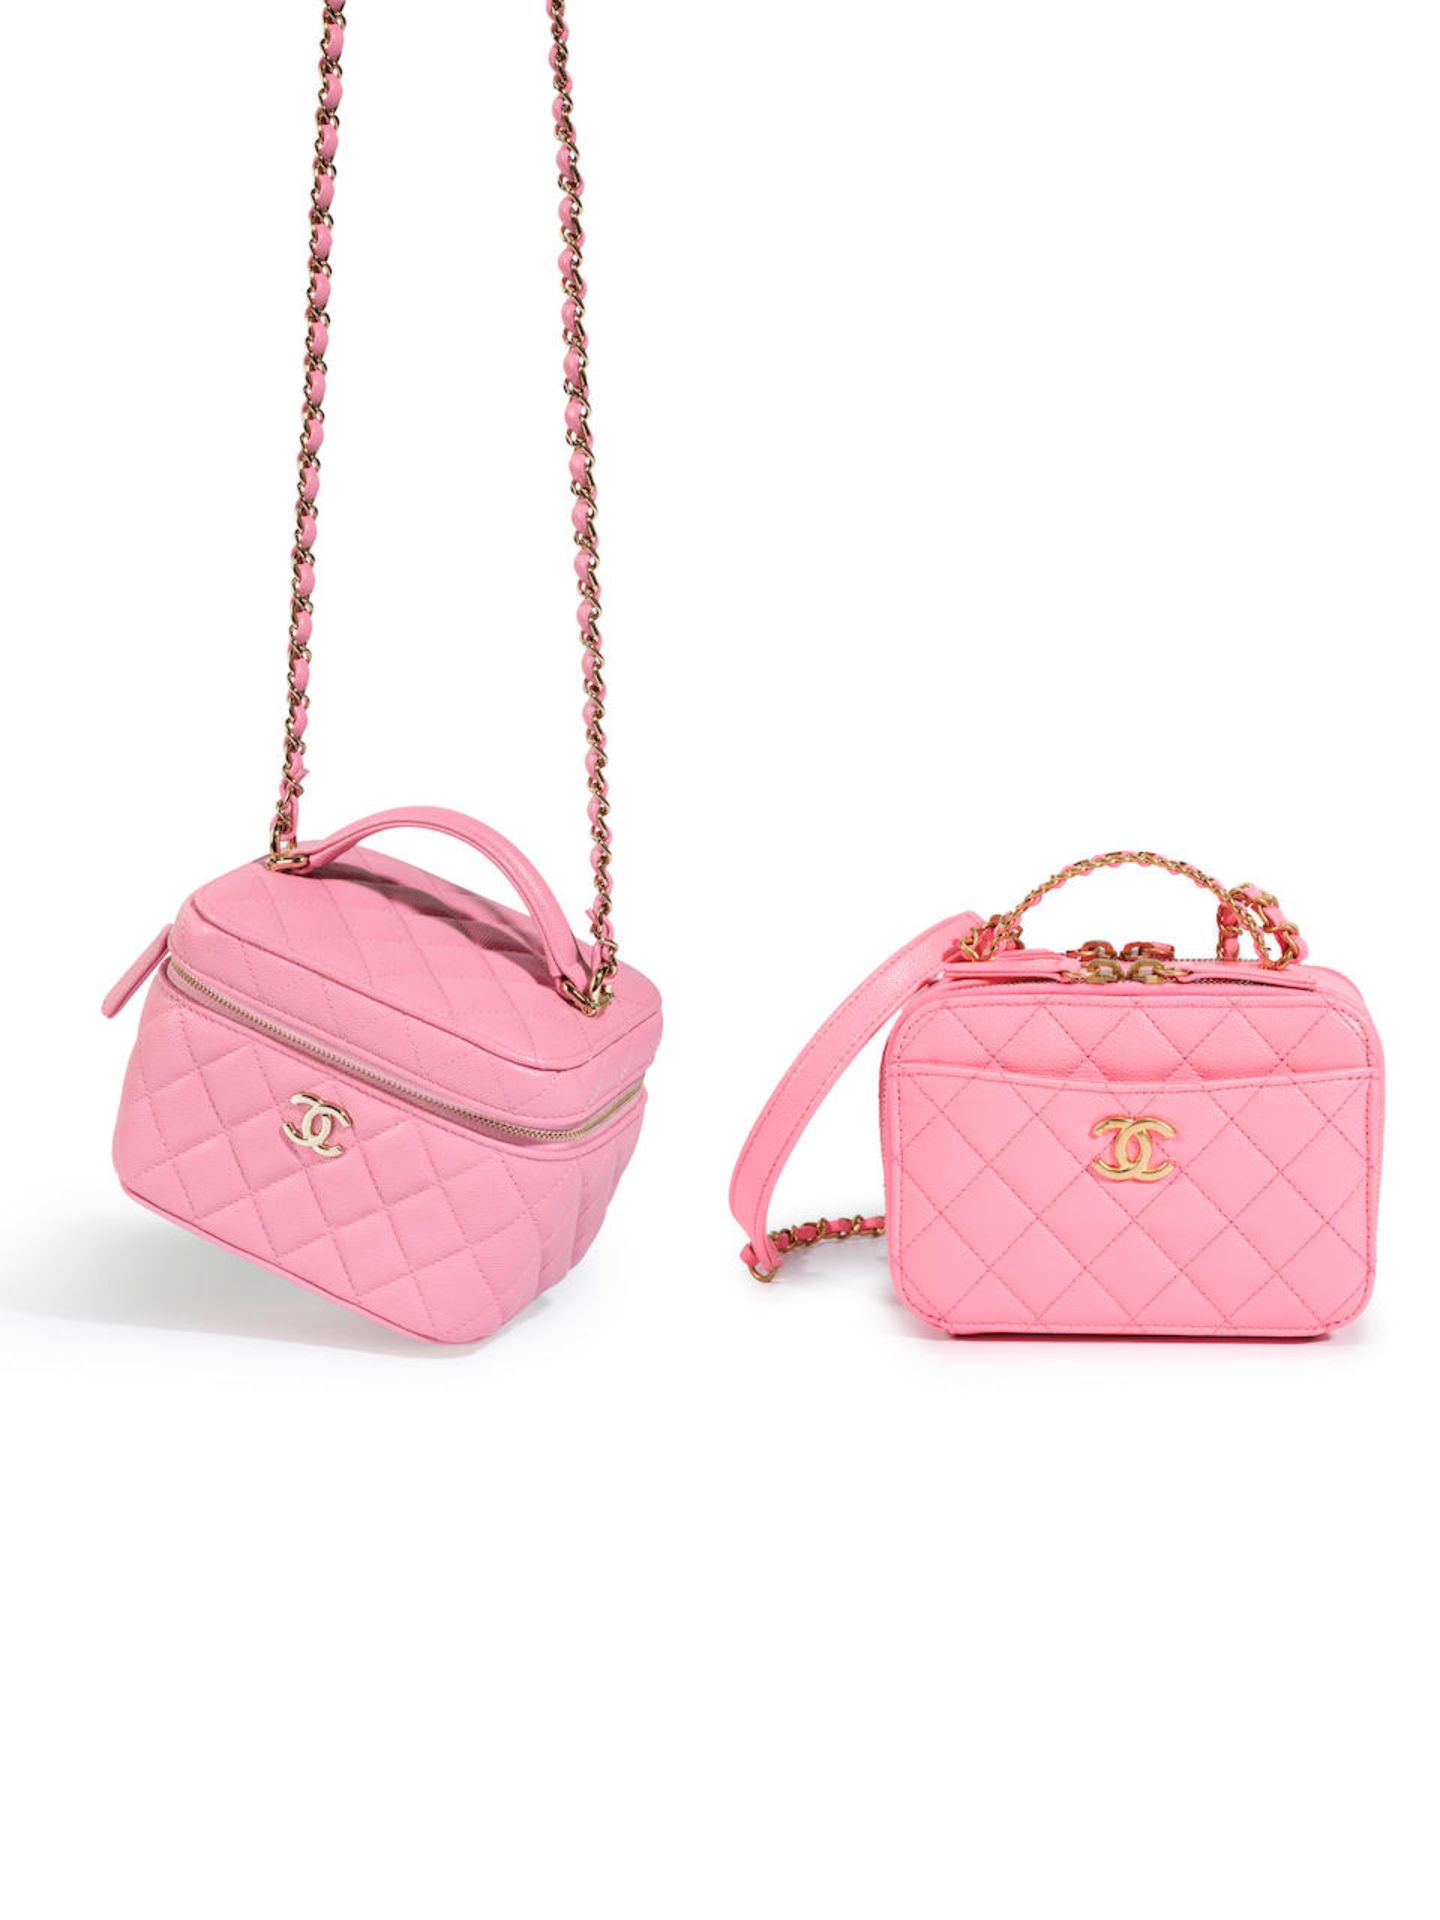 CHANEL: PINK CAVIAR QUILTED CC LOGO TOP HANDLE VANITY CASE; PINK PURPLE CAVIER VANITY CASE WITH ...